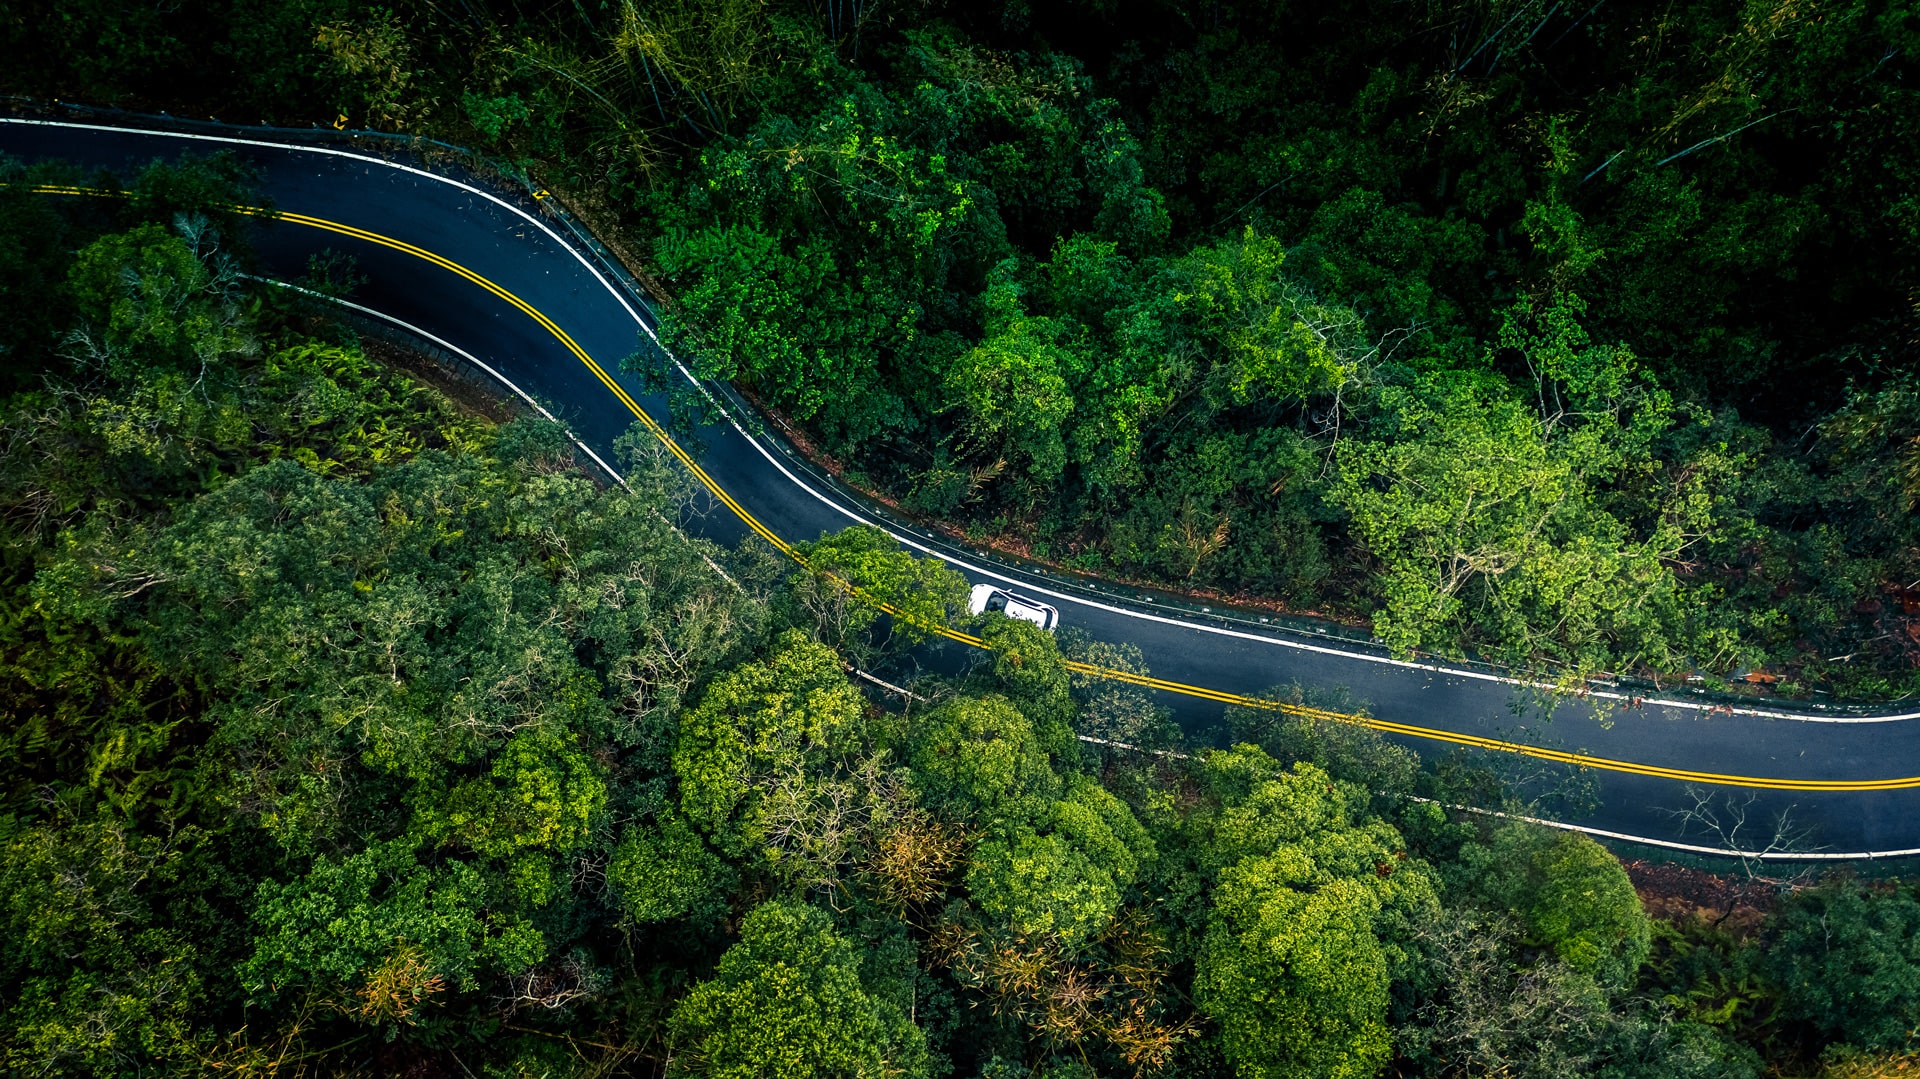 A car drives on a road through the forest; bird's-eye view shot